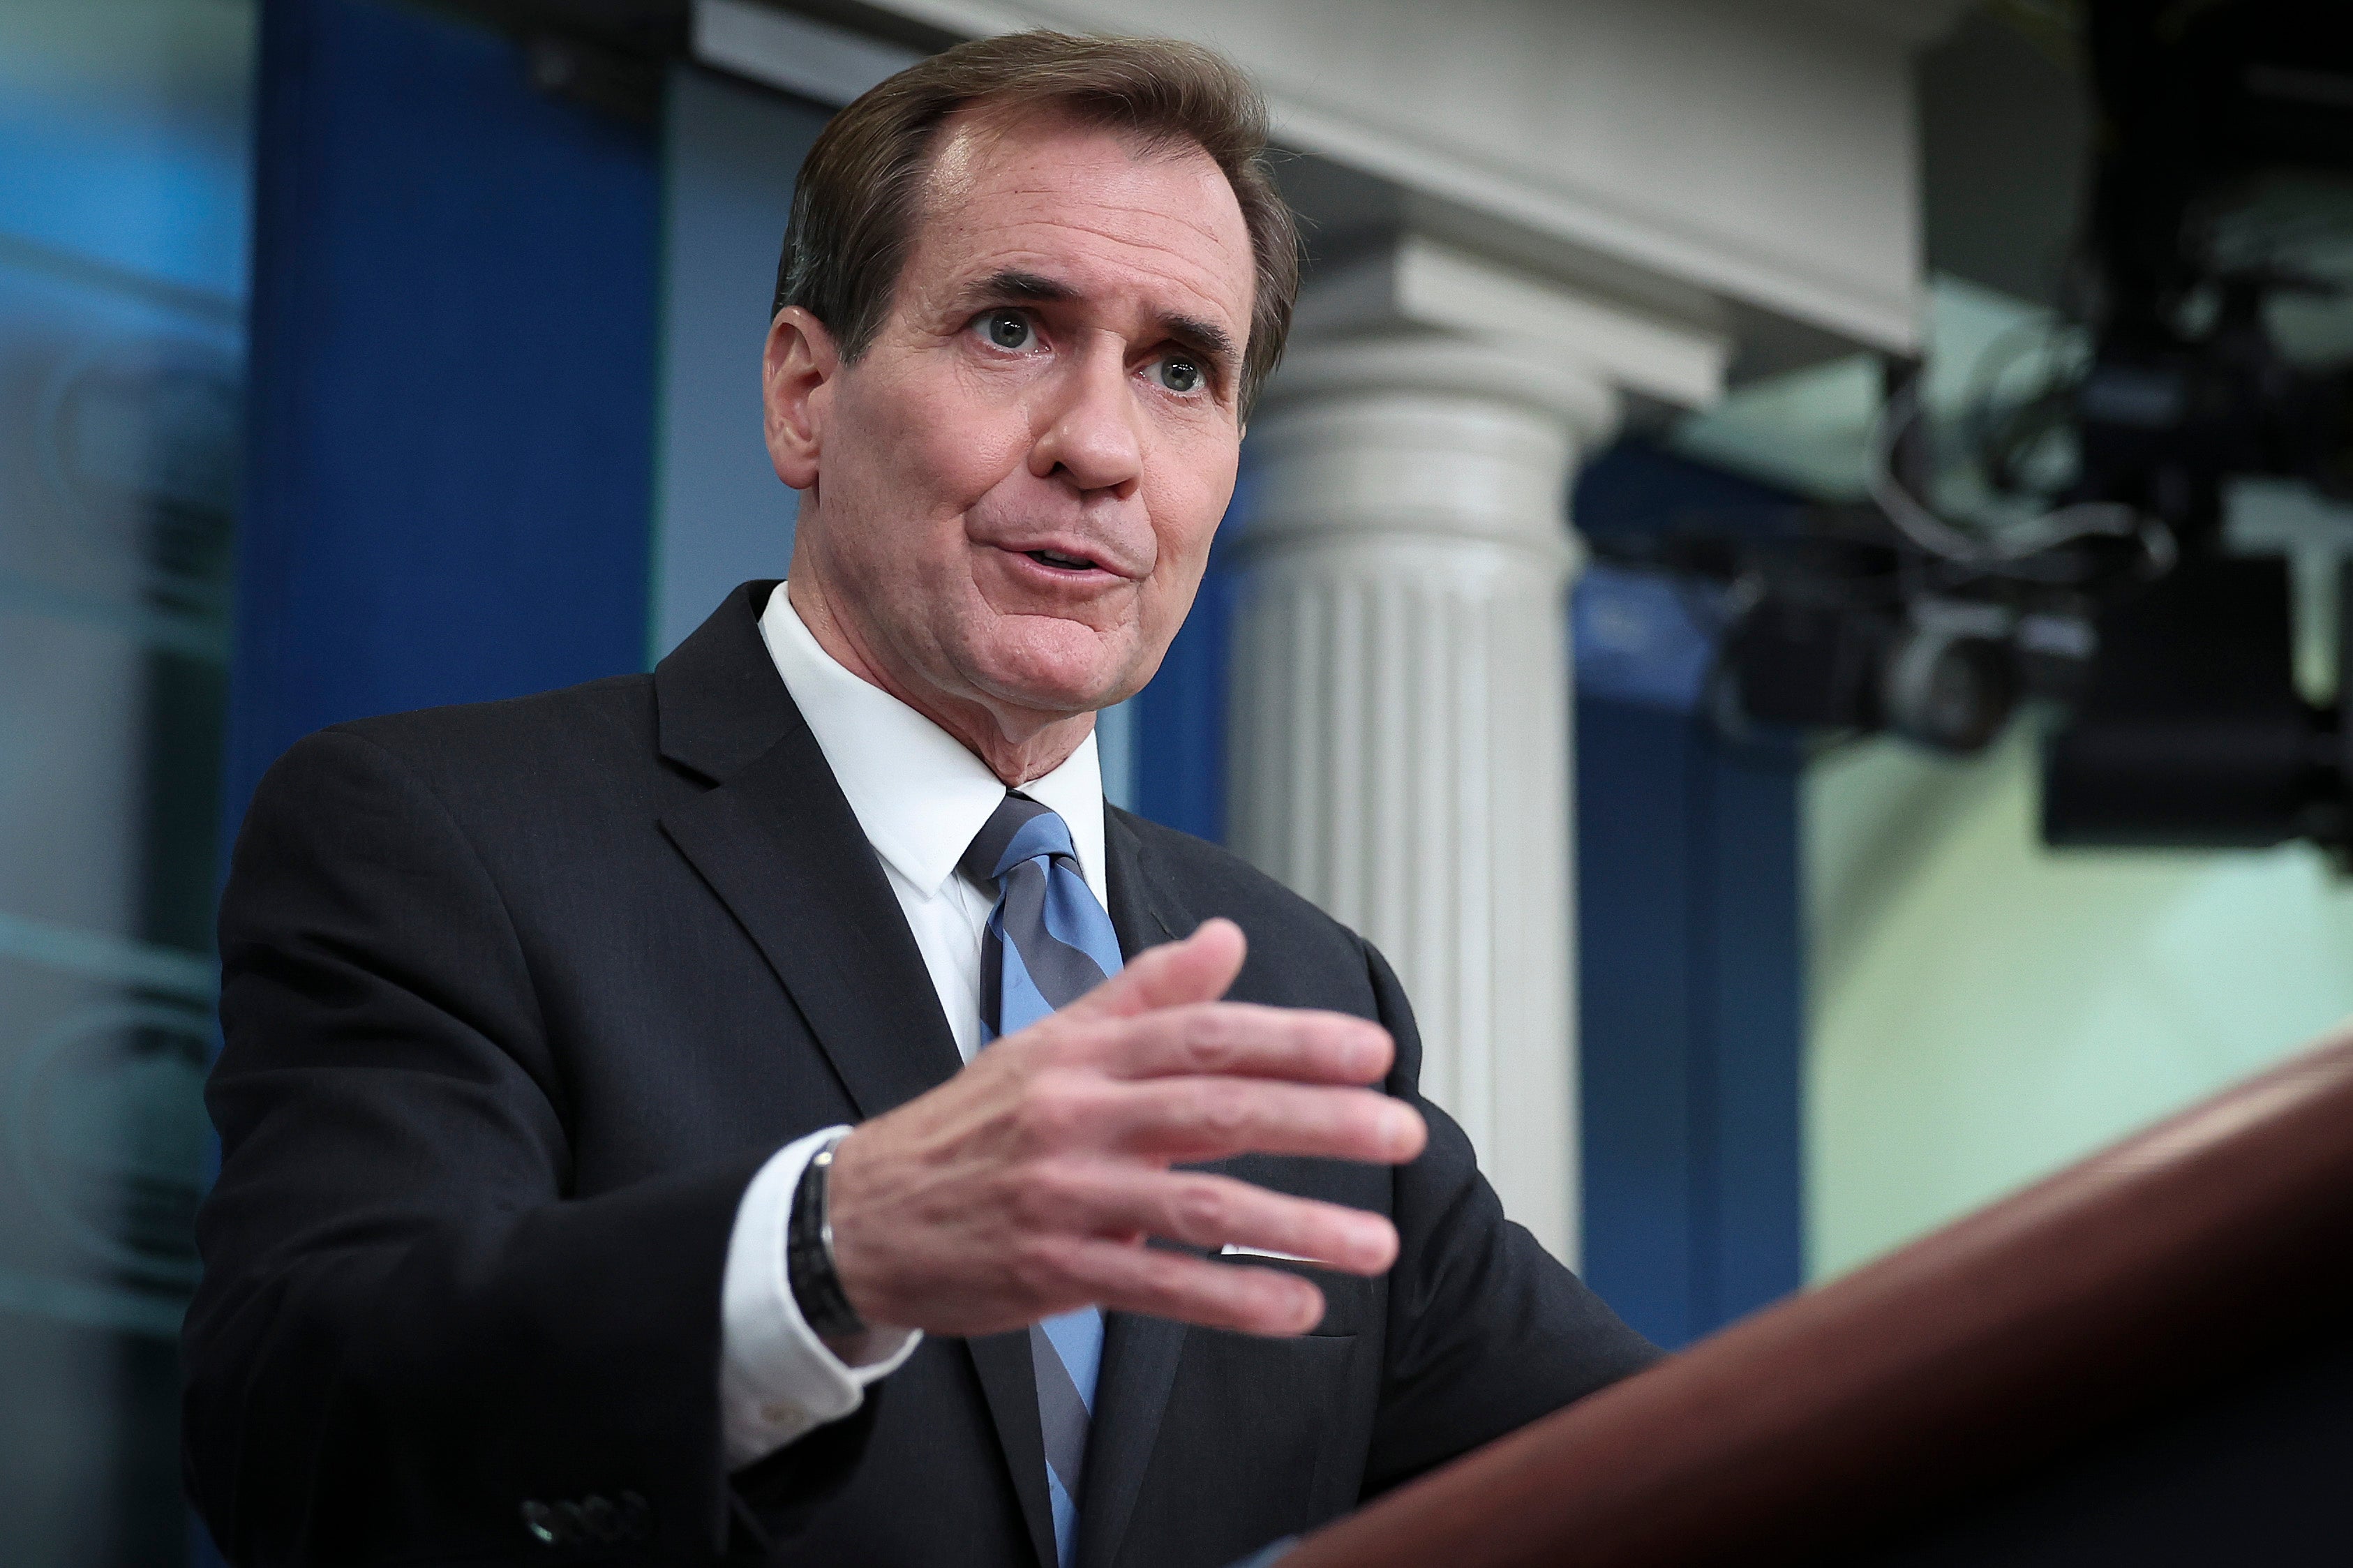 National Security Council coordinator for strategic communications John Kirby answers questions during the daily briefing at the White House on 4 August 2022 in Washington, DC